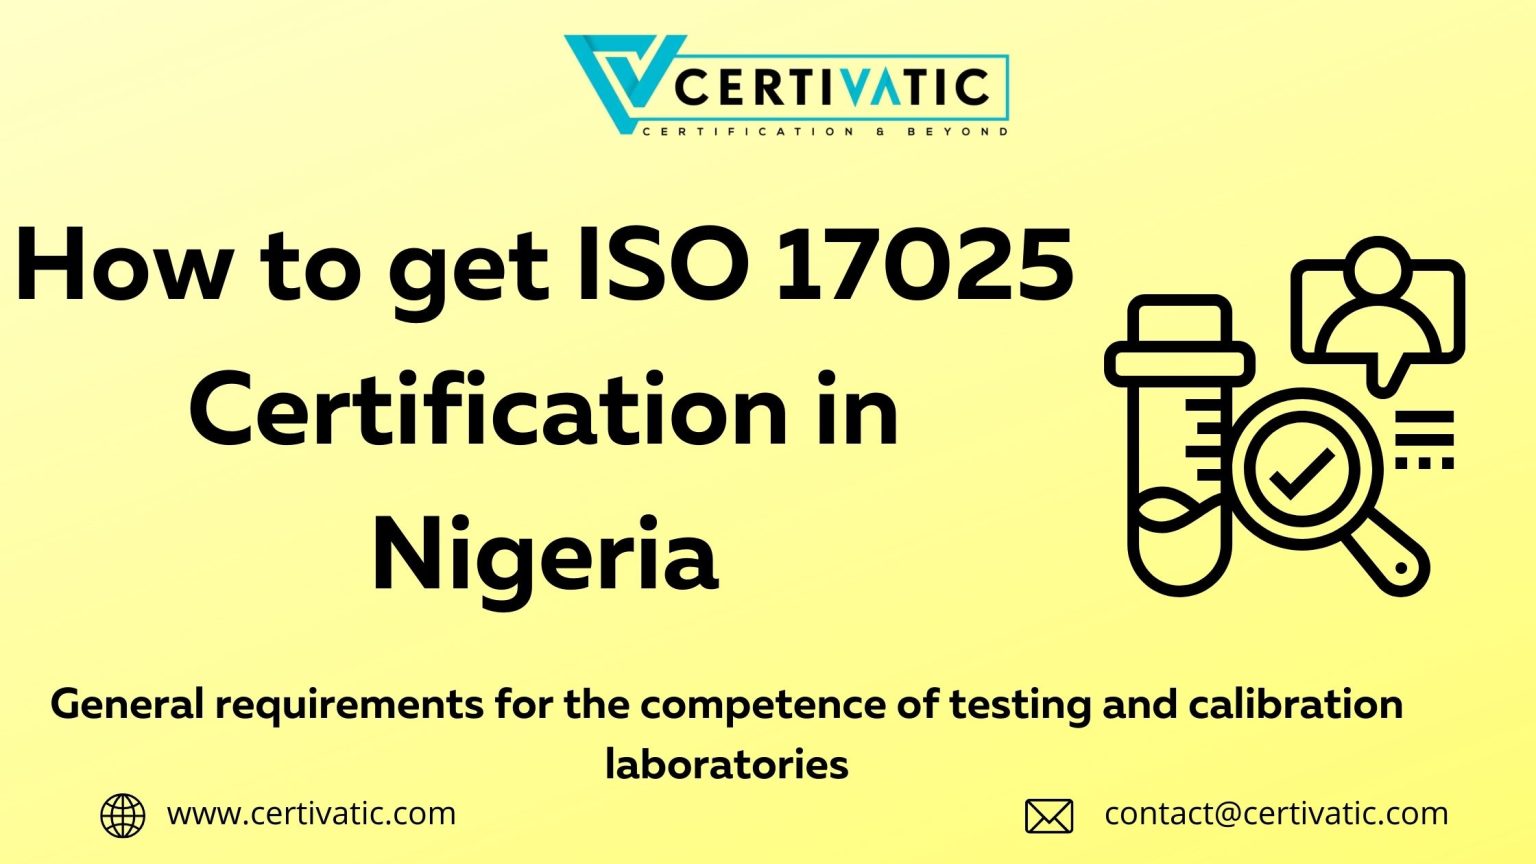 How to get ISO 17025 certification in Nigeria?